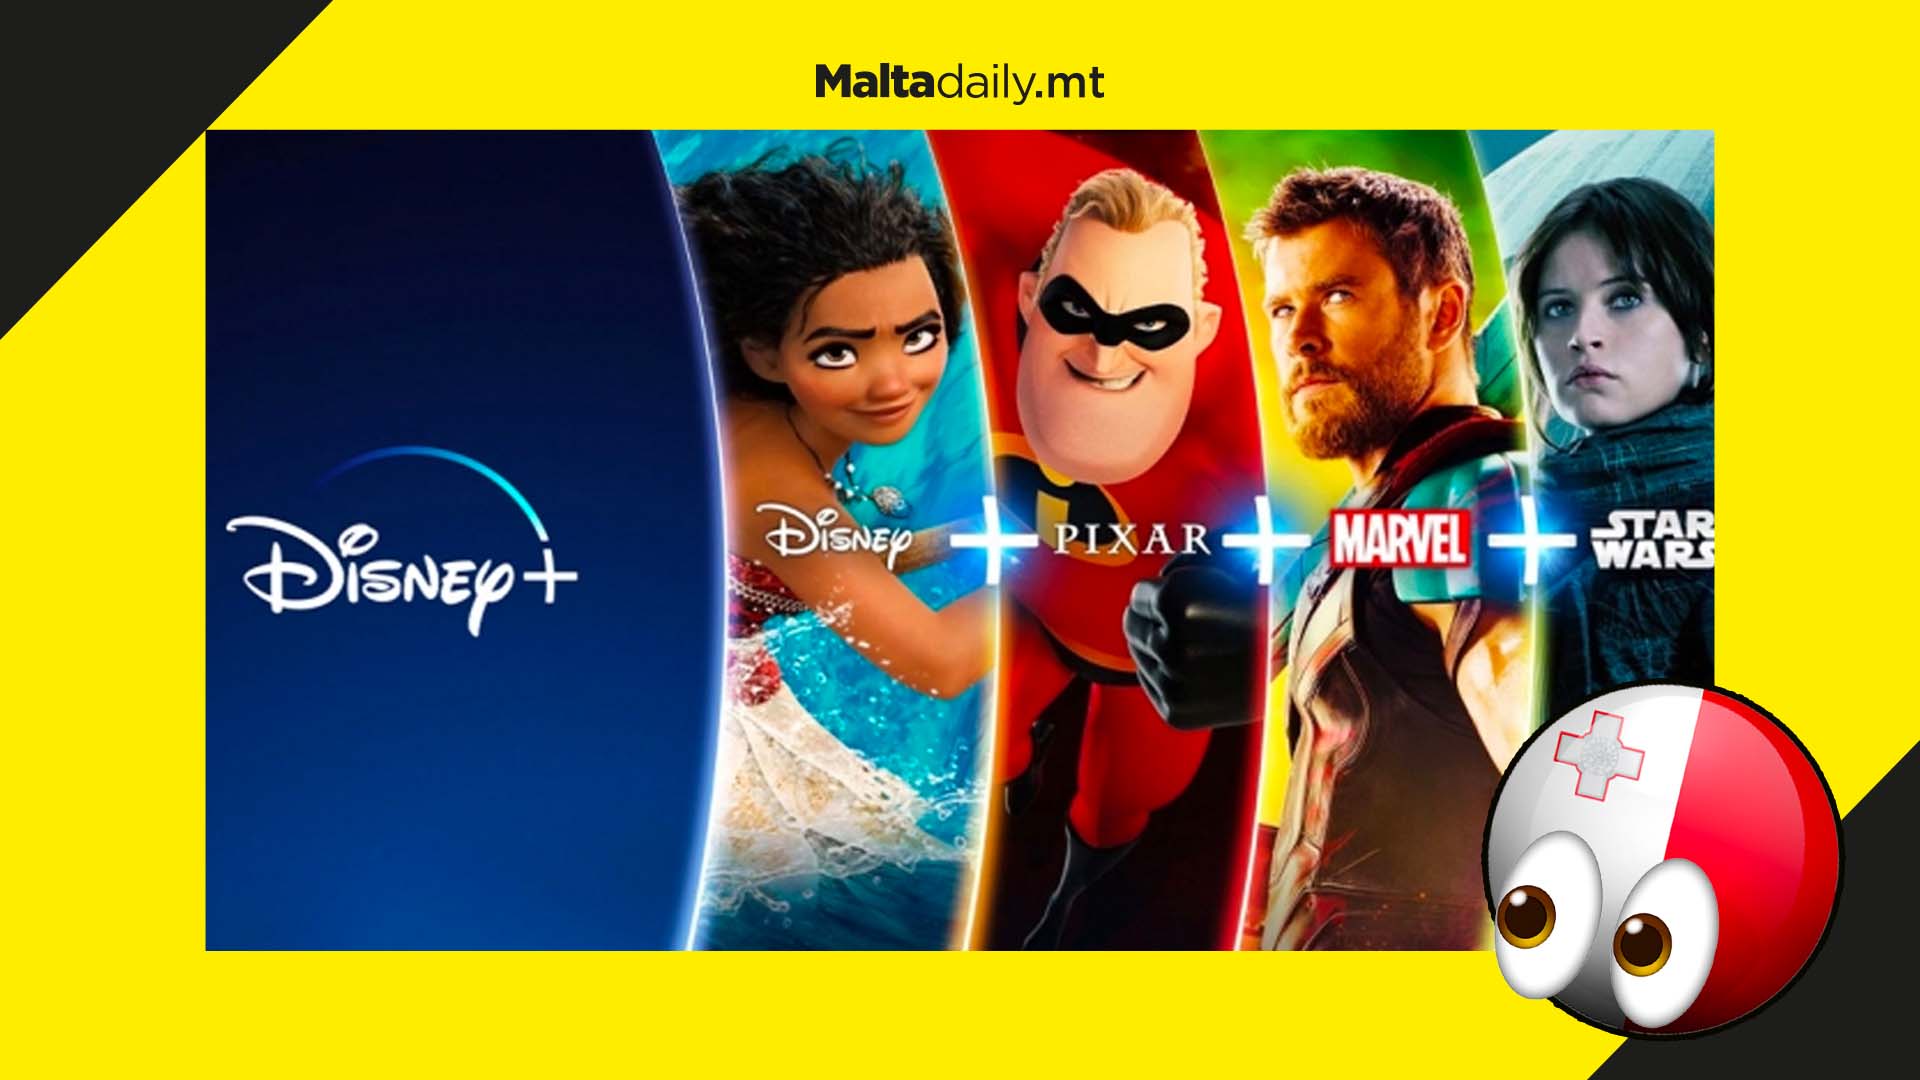 Disney+ is officially in Malta and we’re ready to binge!